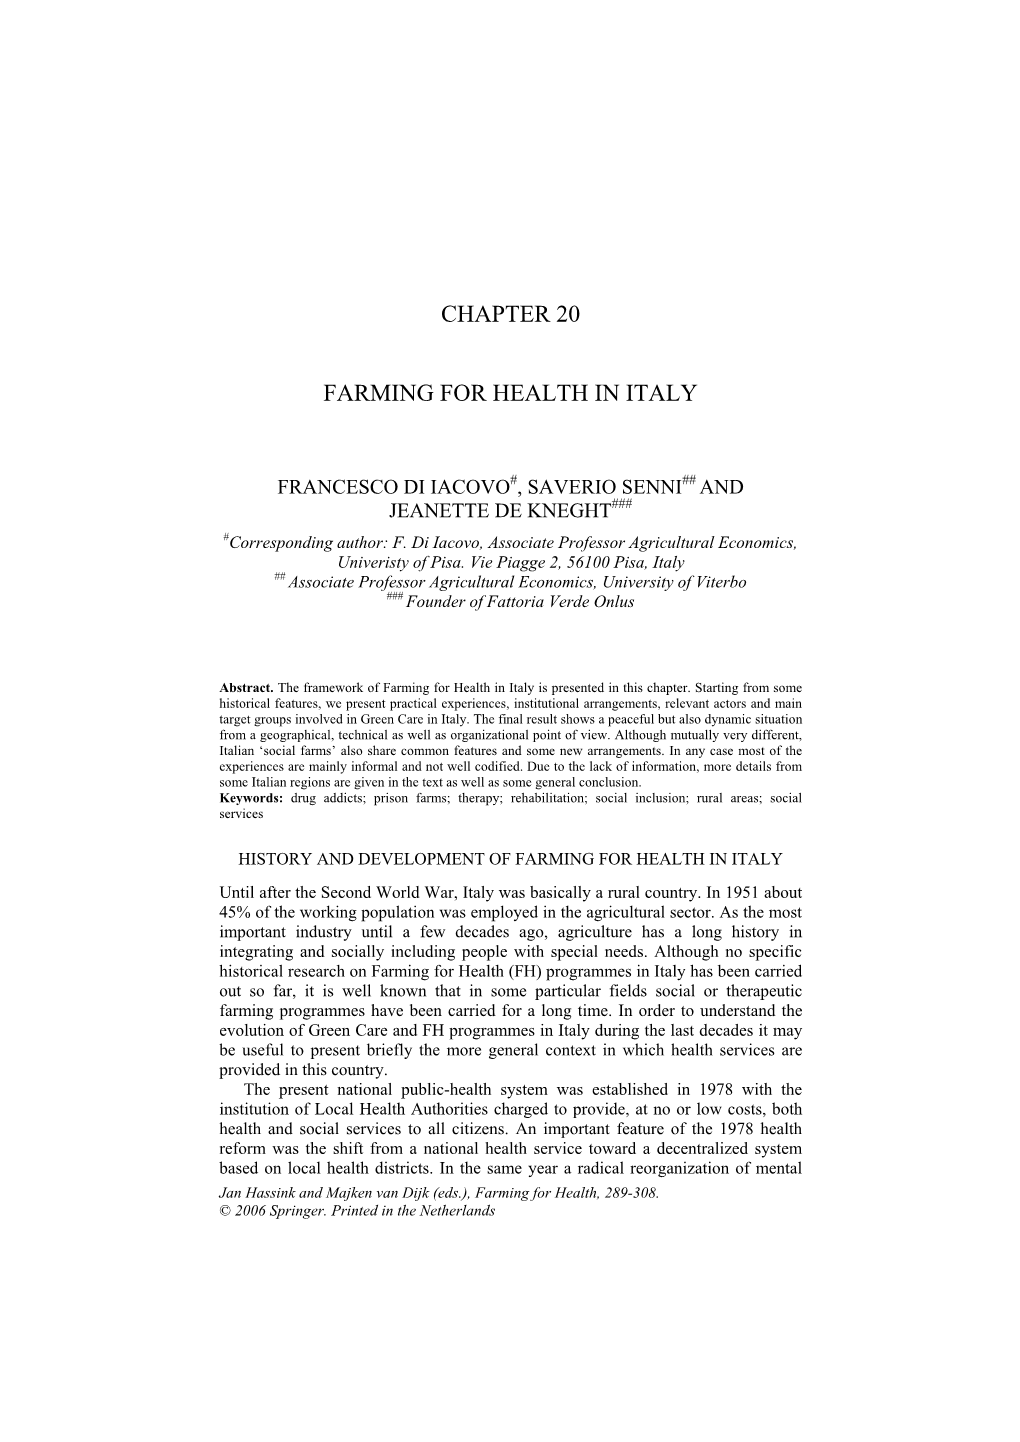 20. Farming for Health in Italy